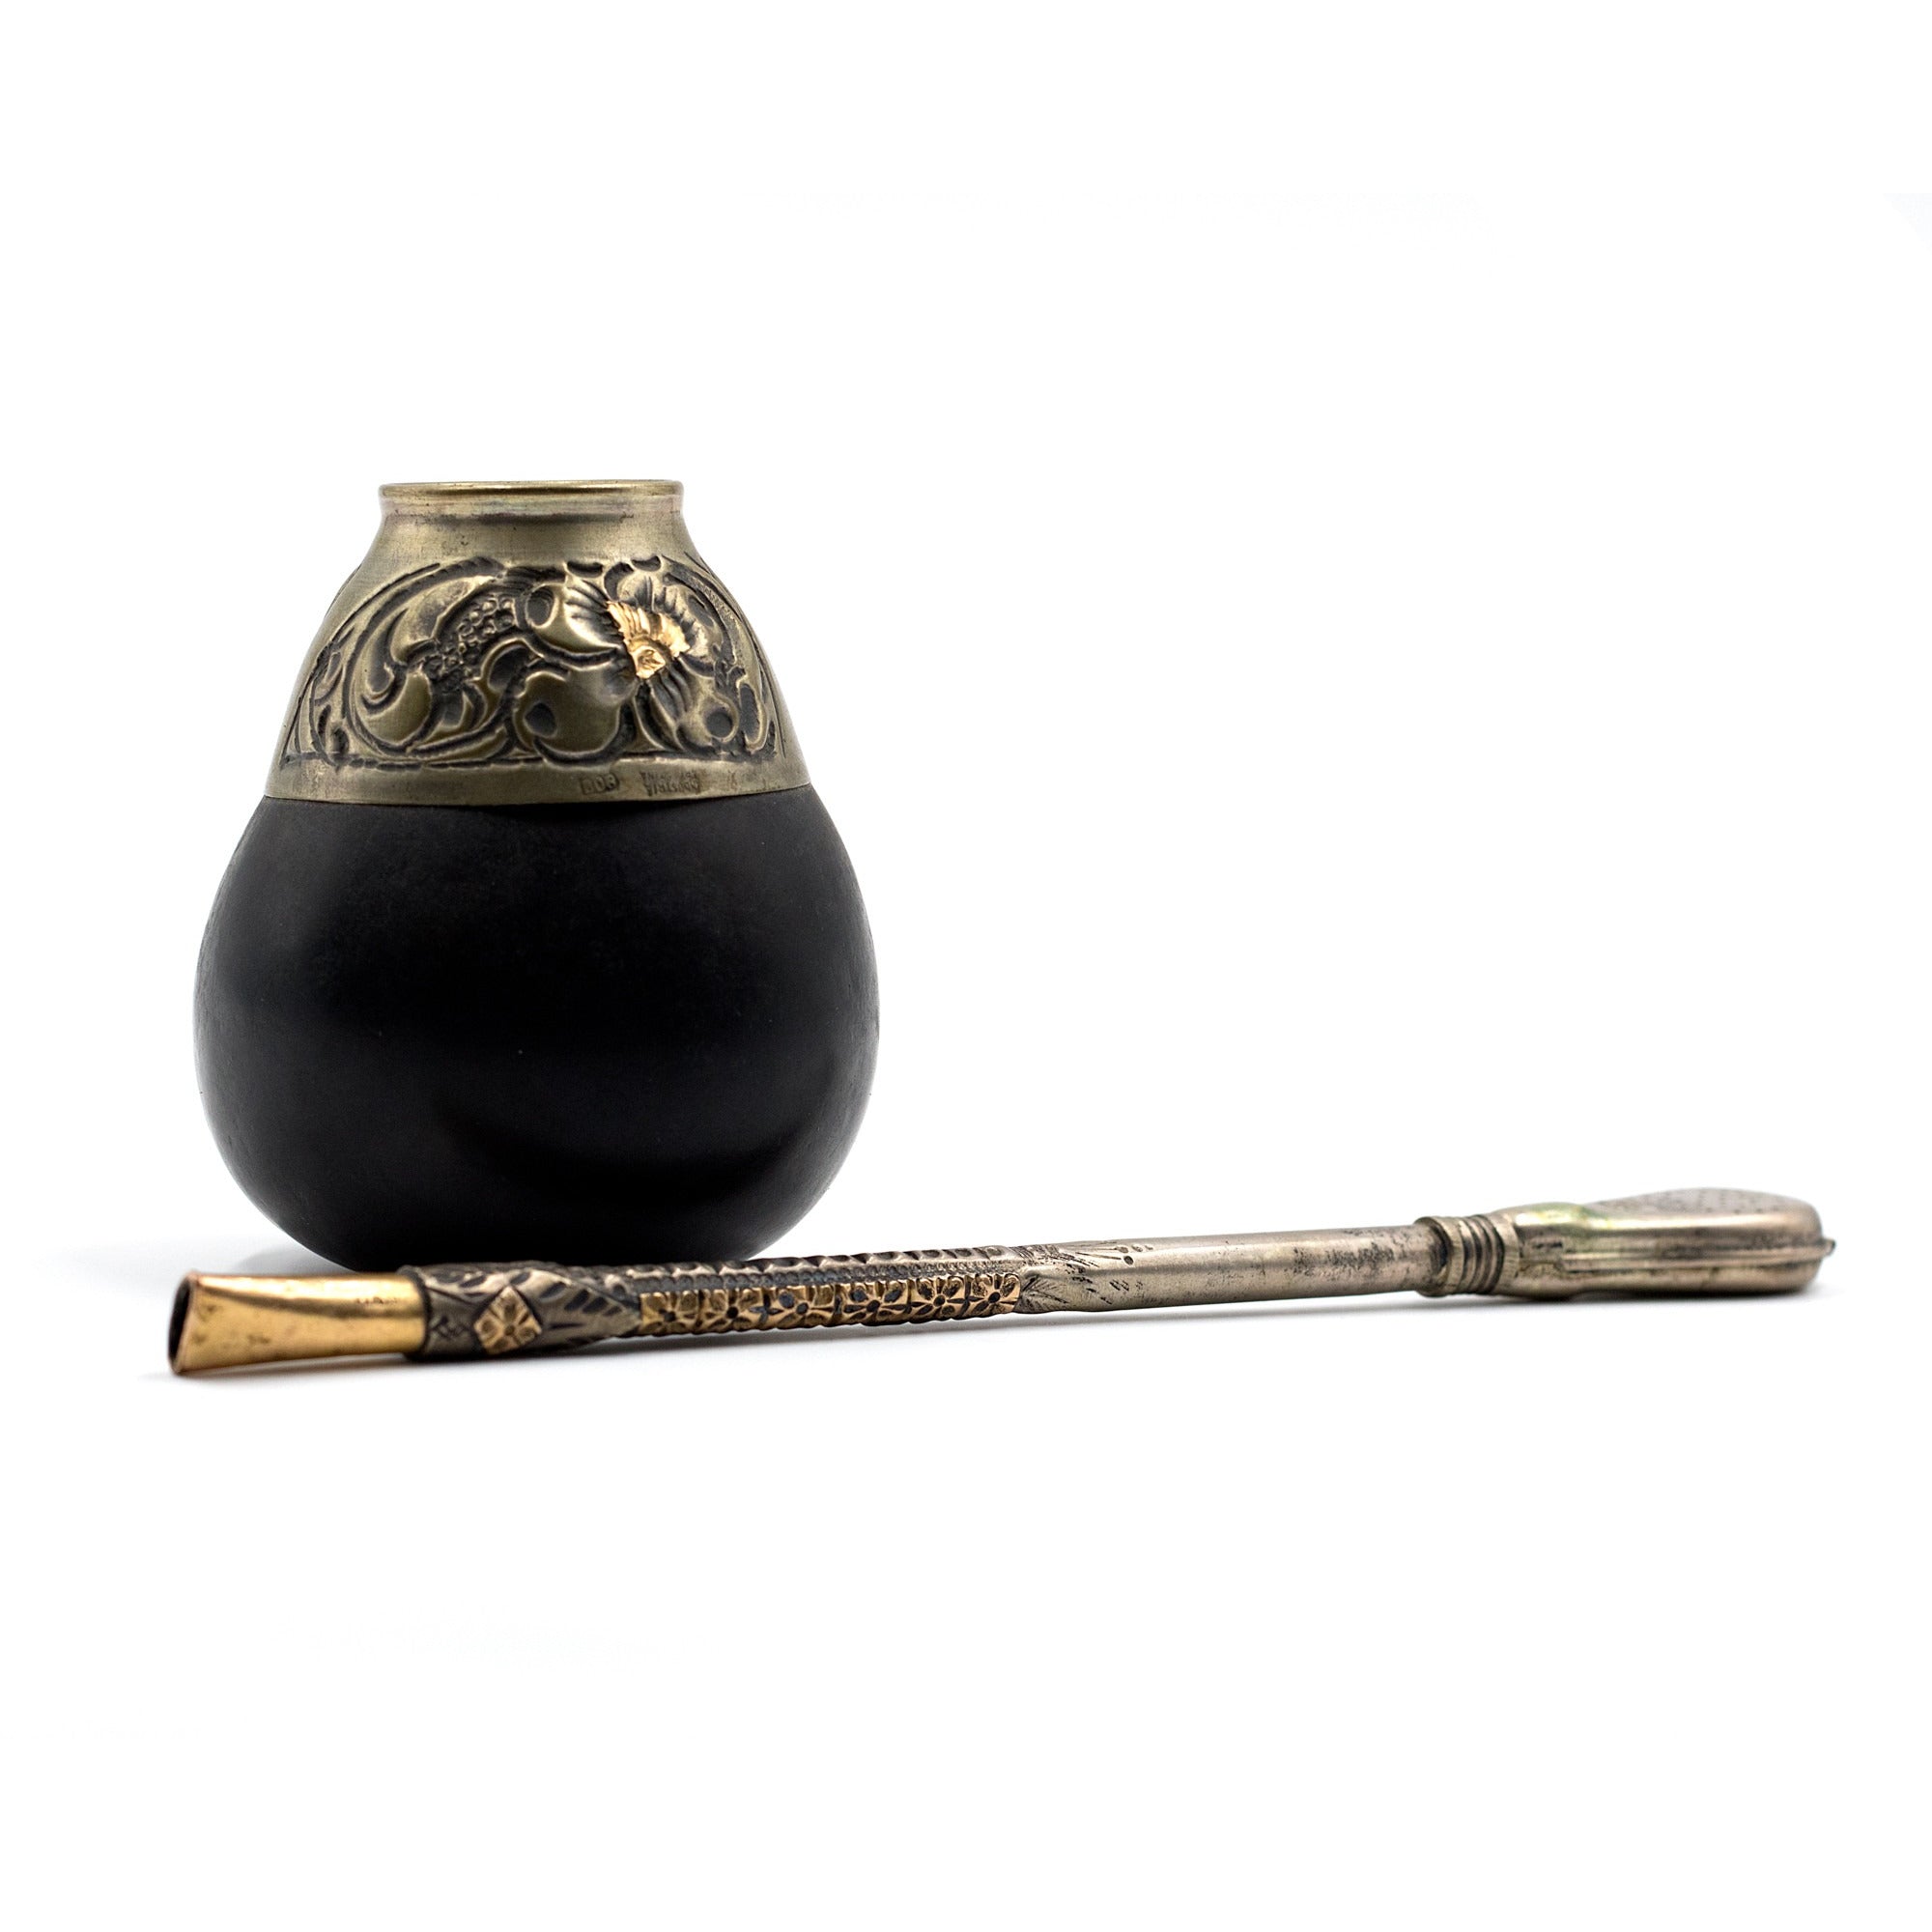 Argentine Mate Gourd With Silver Ornamentation and Sipper